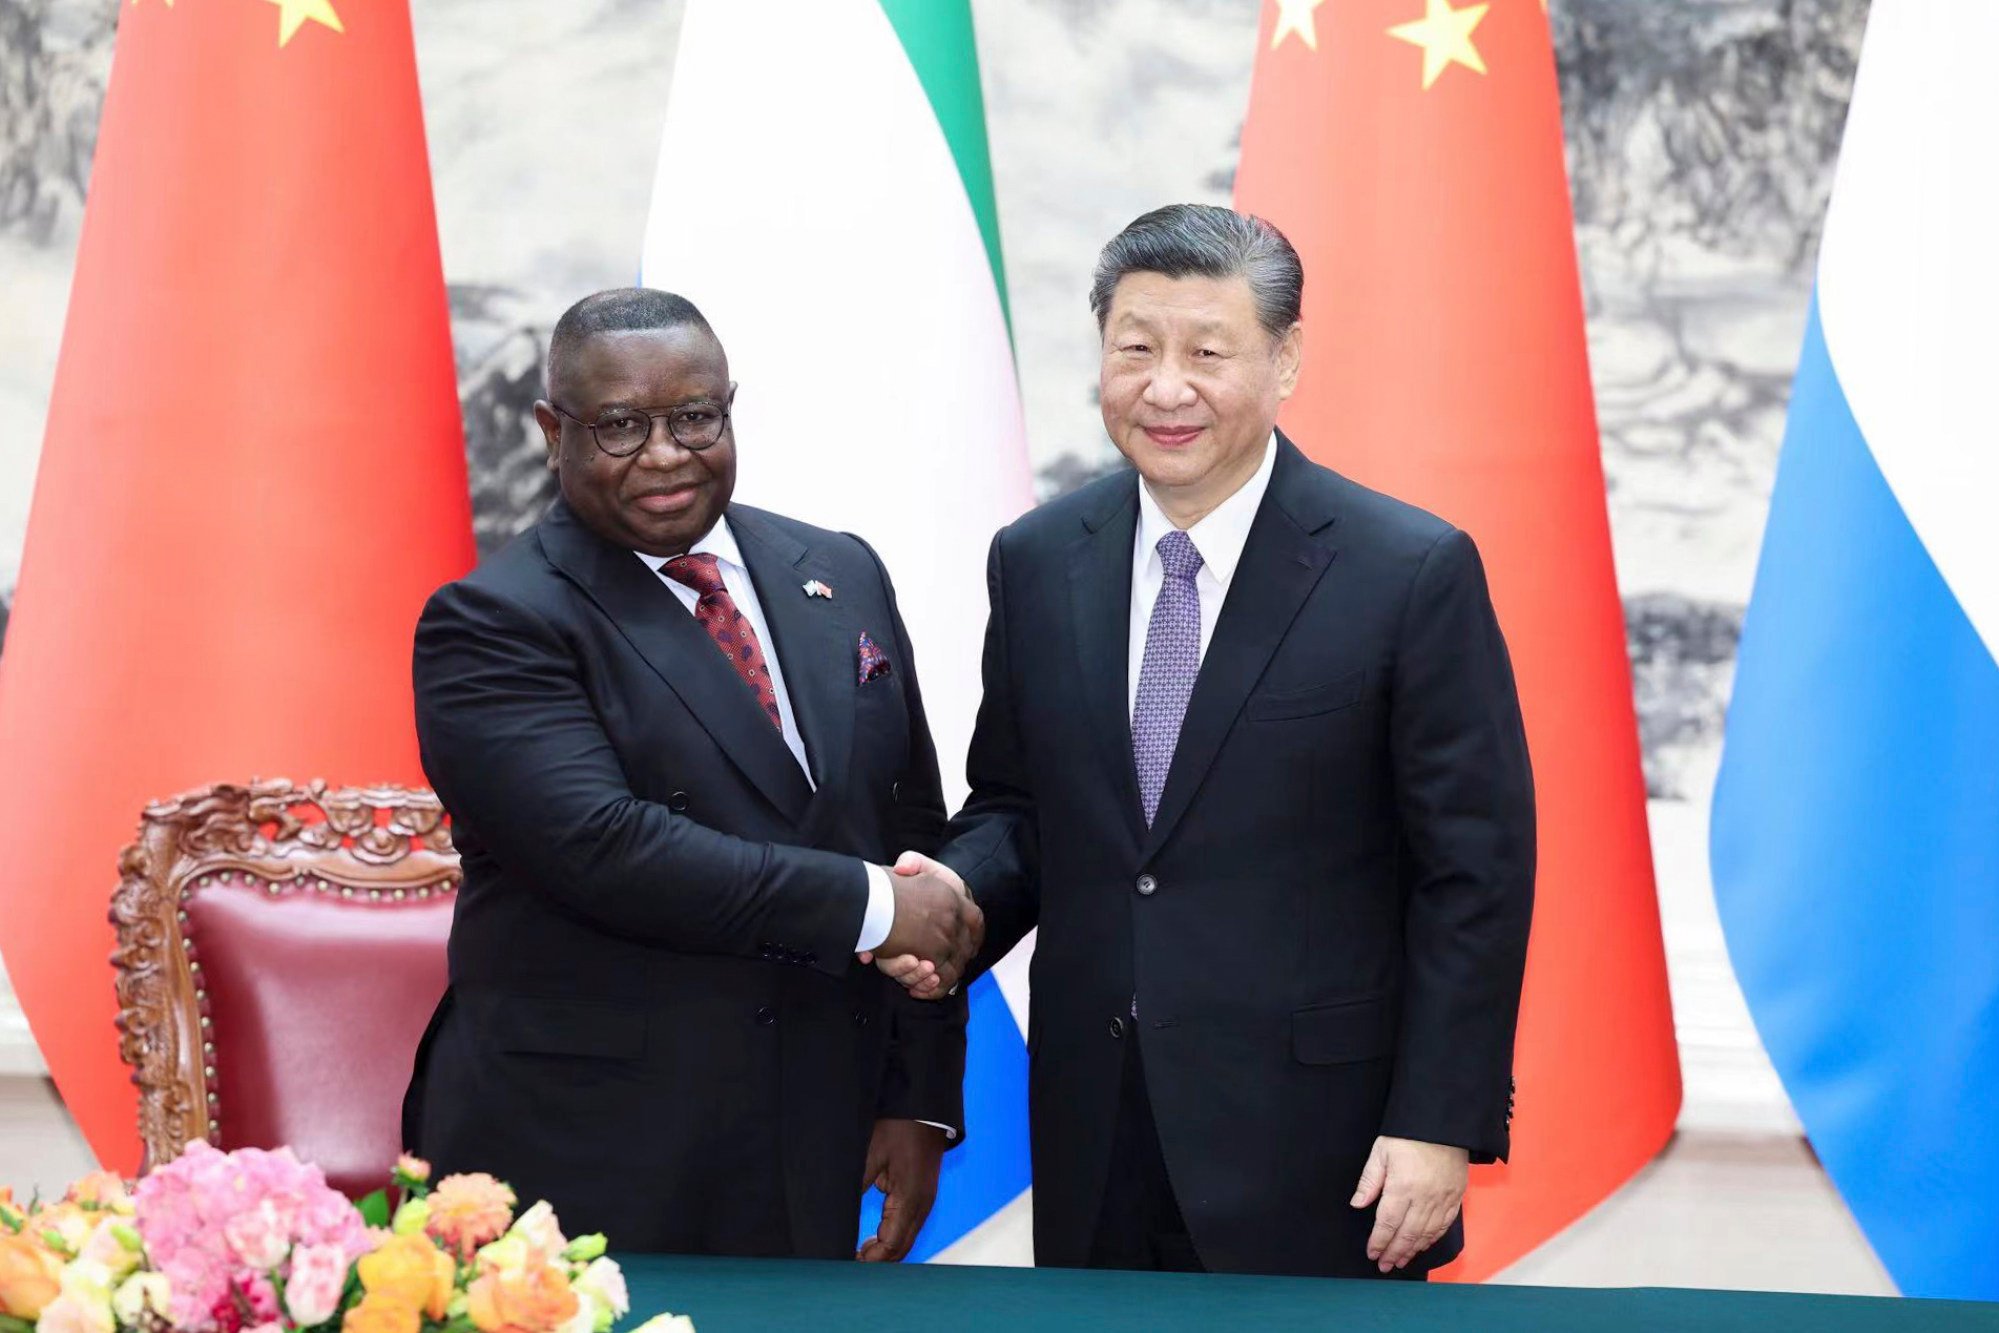 Sierra Leone President Julius Maada Bio and Chinese President Xi Jinping at the signing of bilateral cooperation documents including belt and road projects in Beijing on February 28. Photo: Xinhua